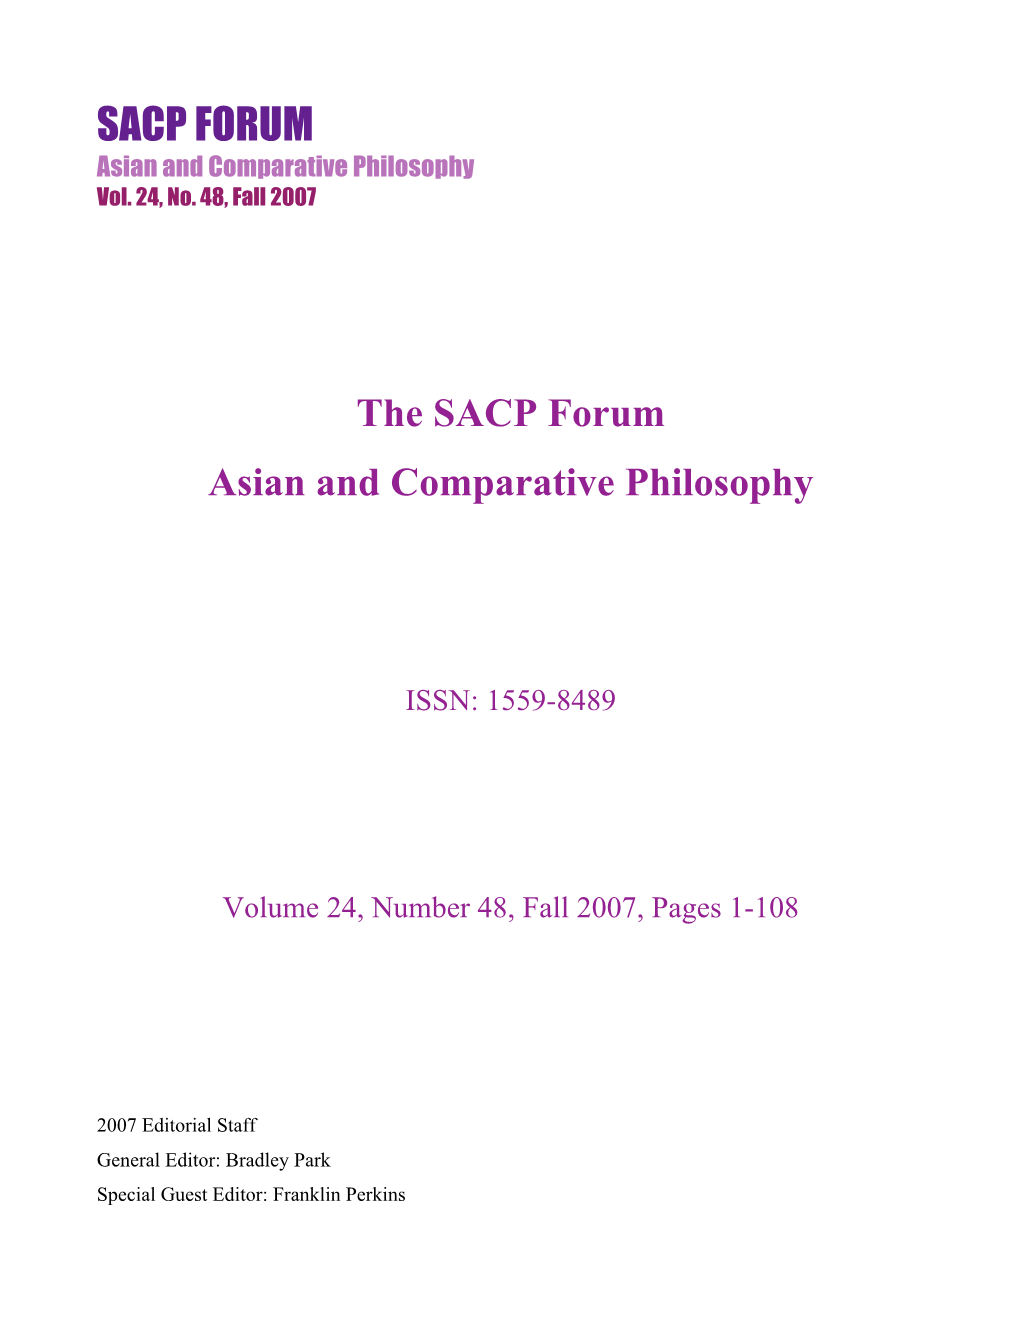 The SACP Forum Asian and Comparative Philosophy